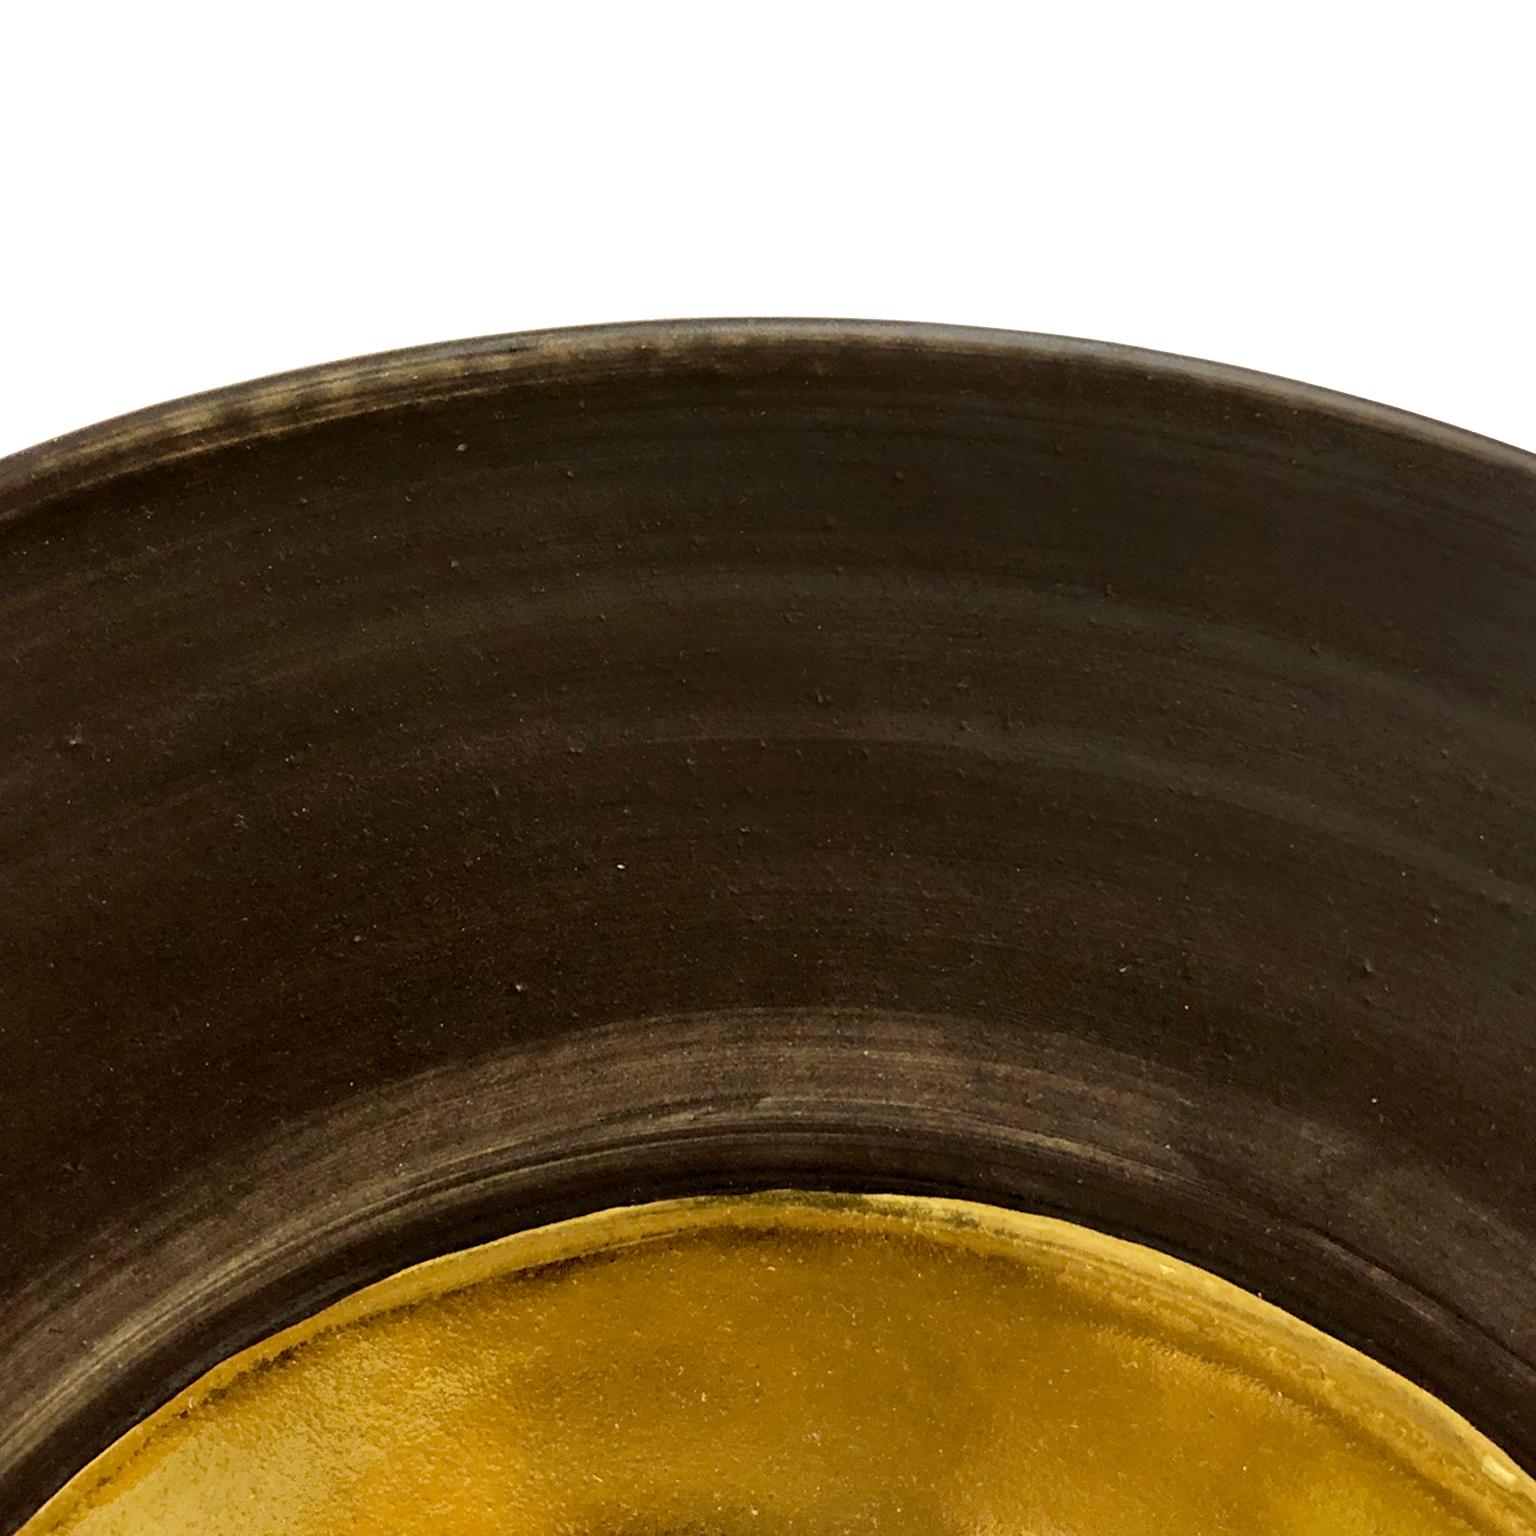 American Low Ceramic Bowl with Rust Glaze and 22K Gold Lustre Interior by Sandi Fellman